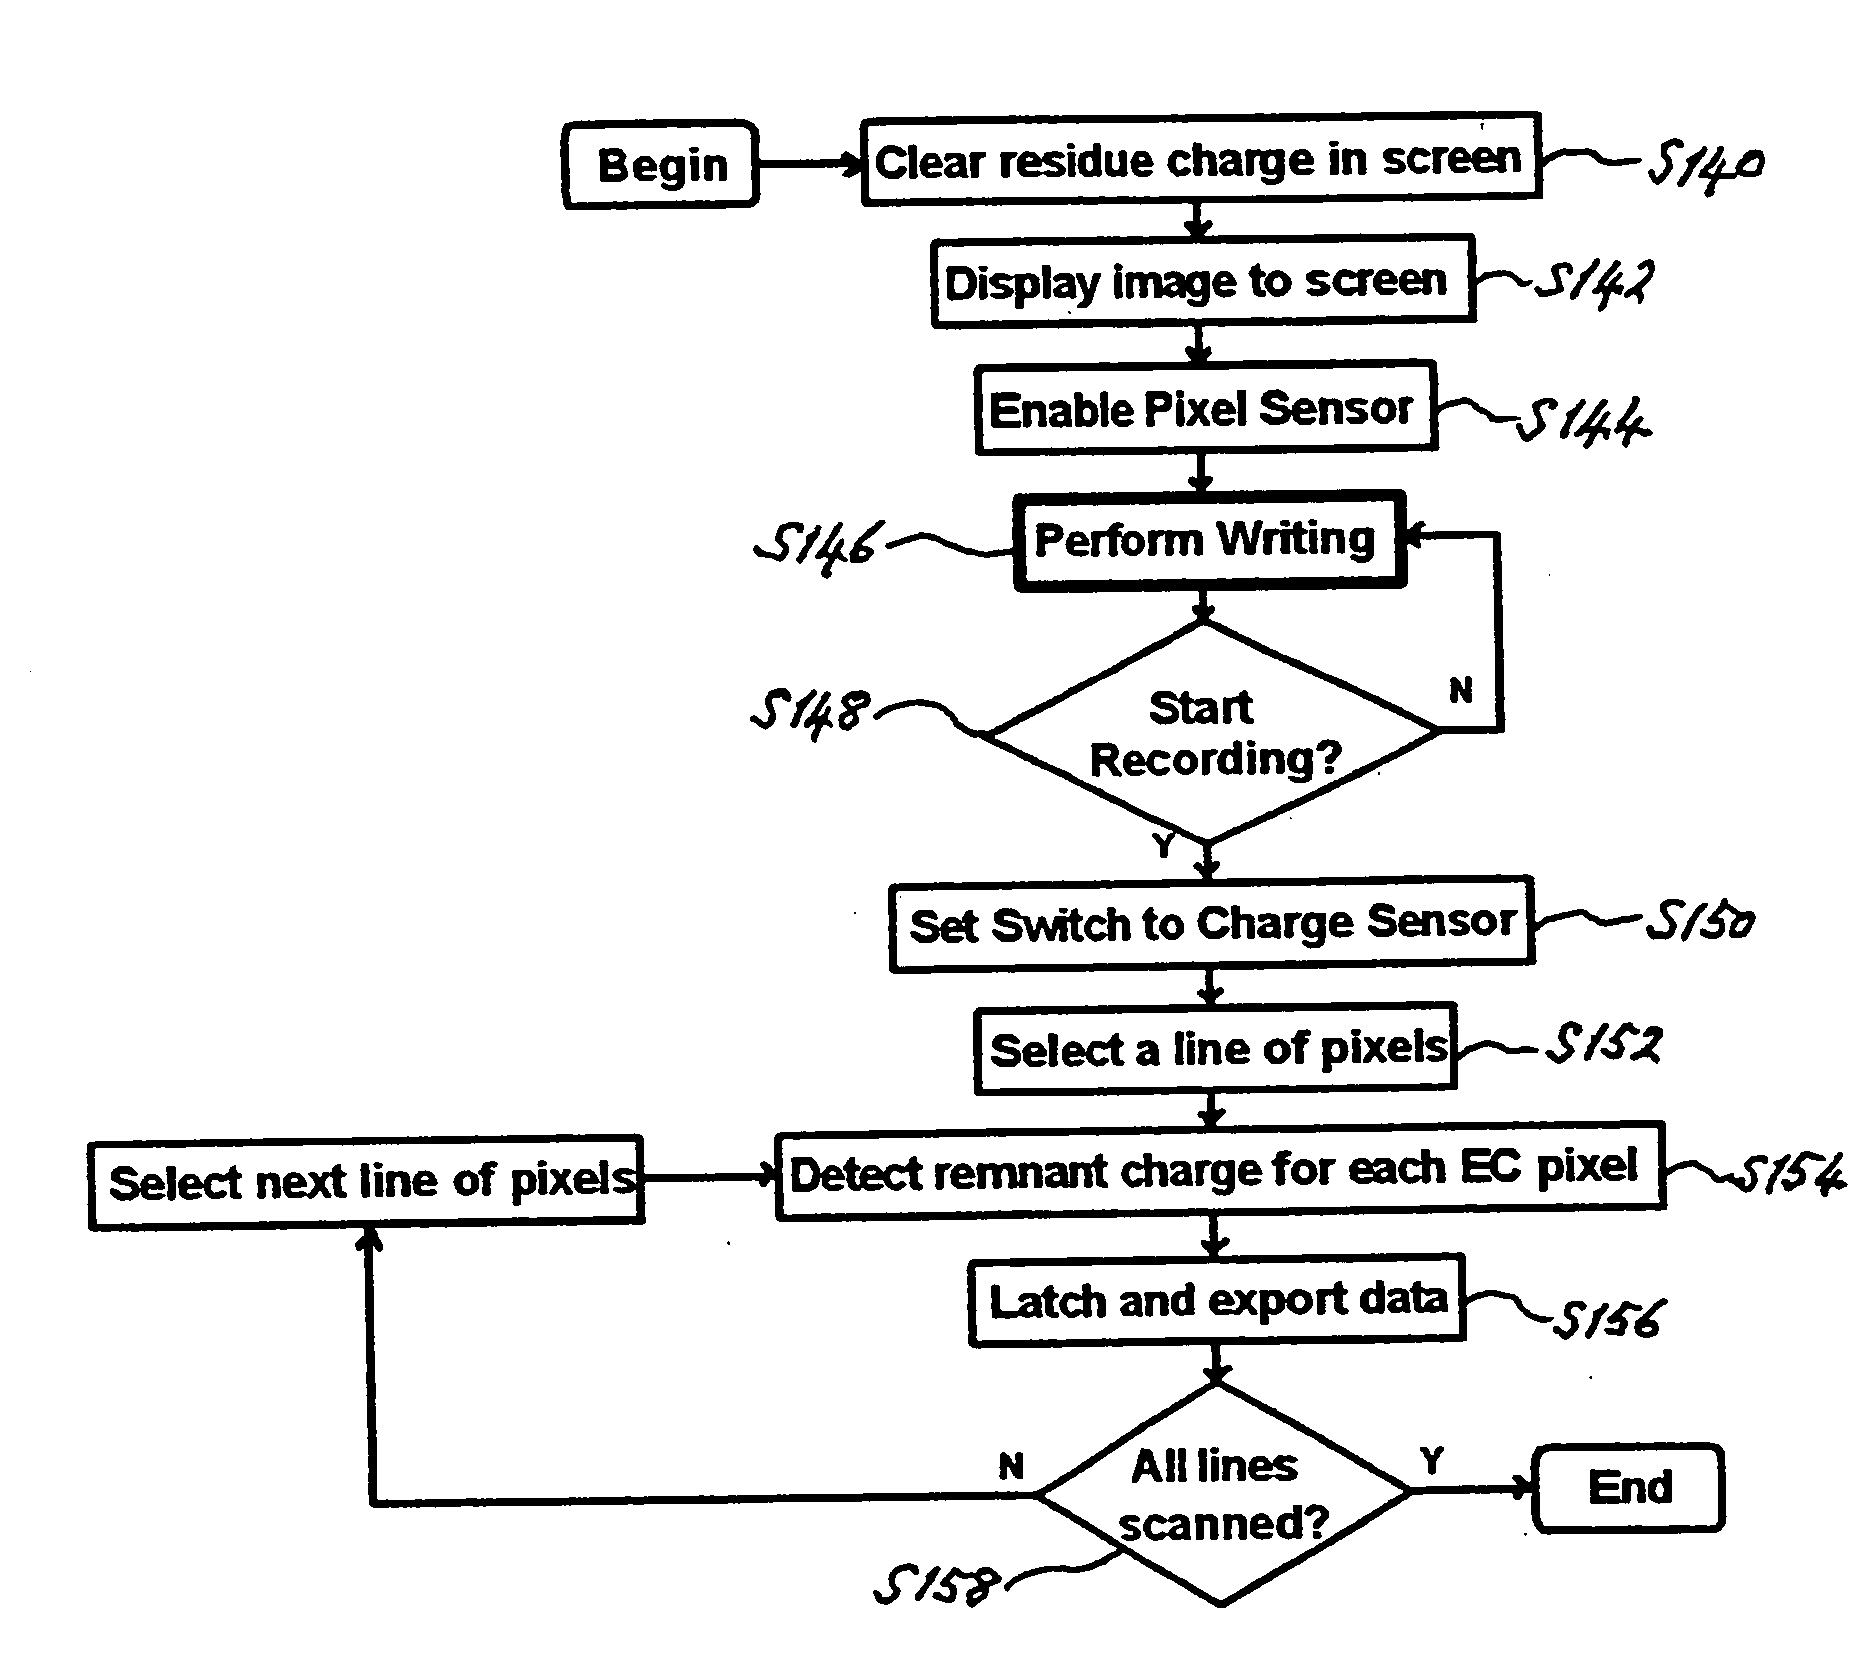 Display apparatus and method for operating a display apparatus